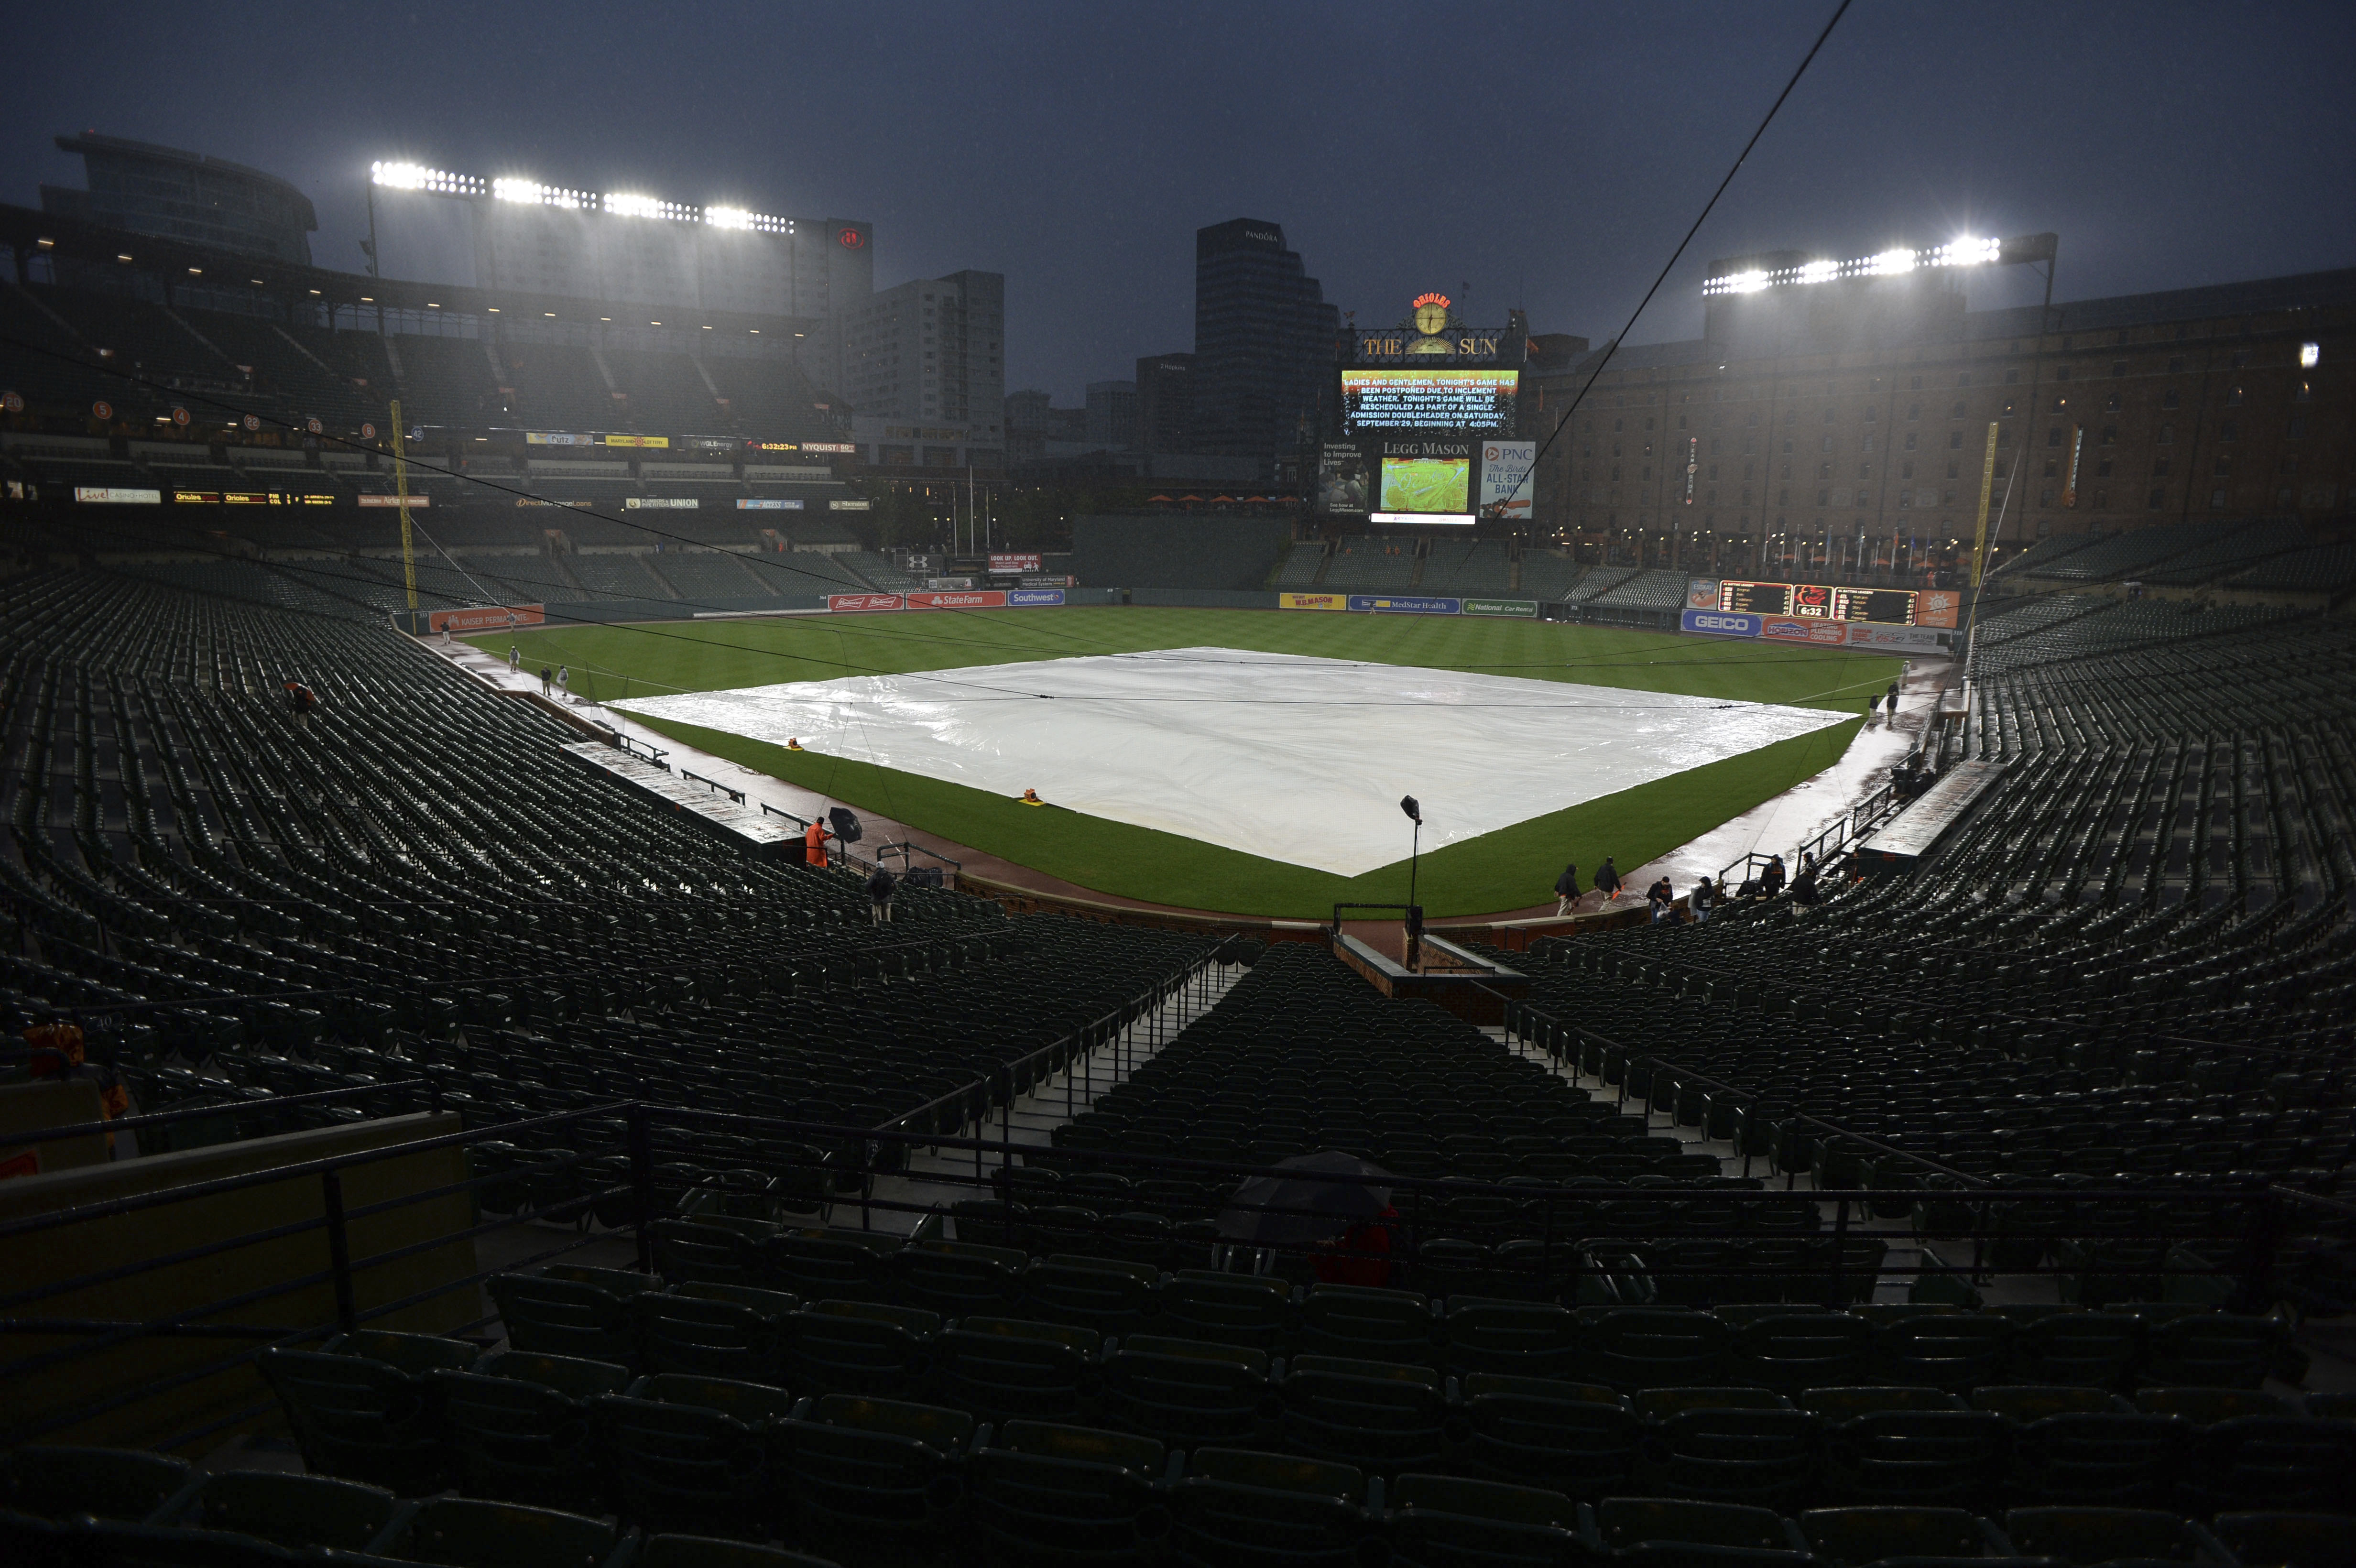 Astros-Orioles rained out; makeup doubleheader Saturday